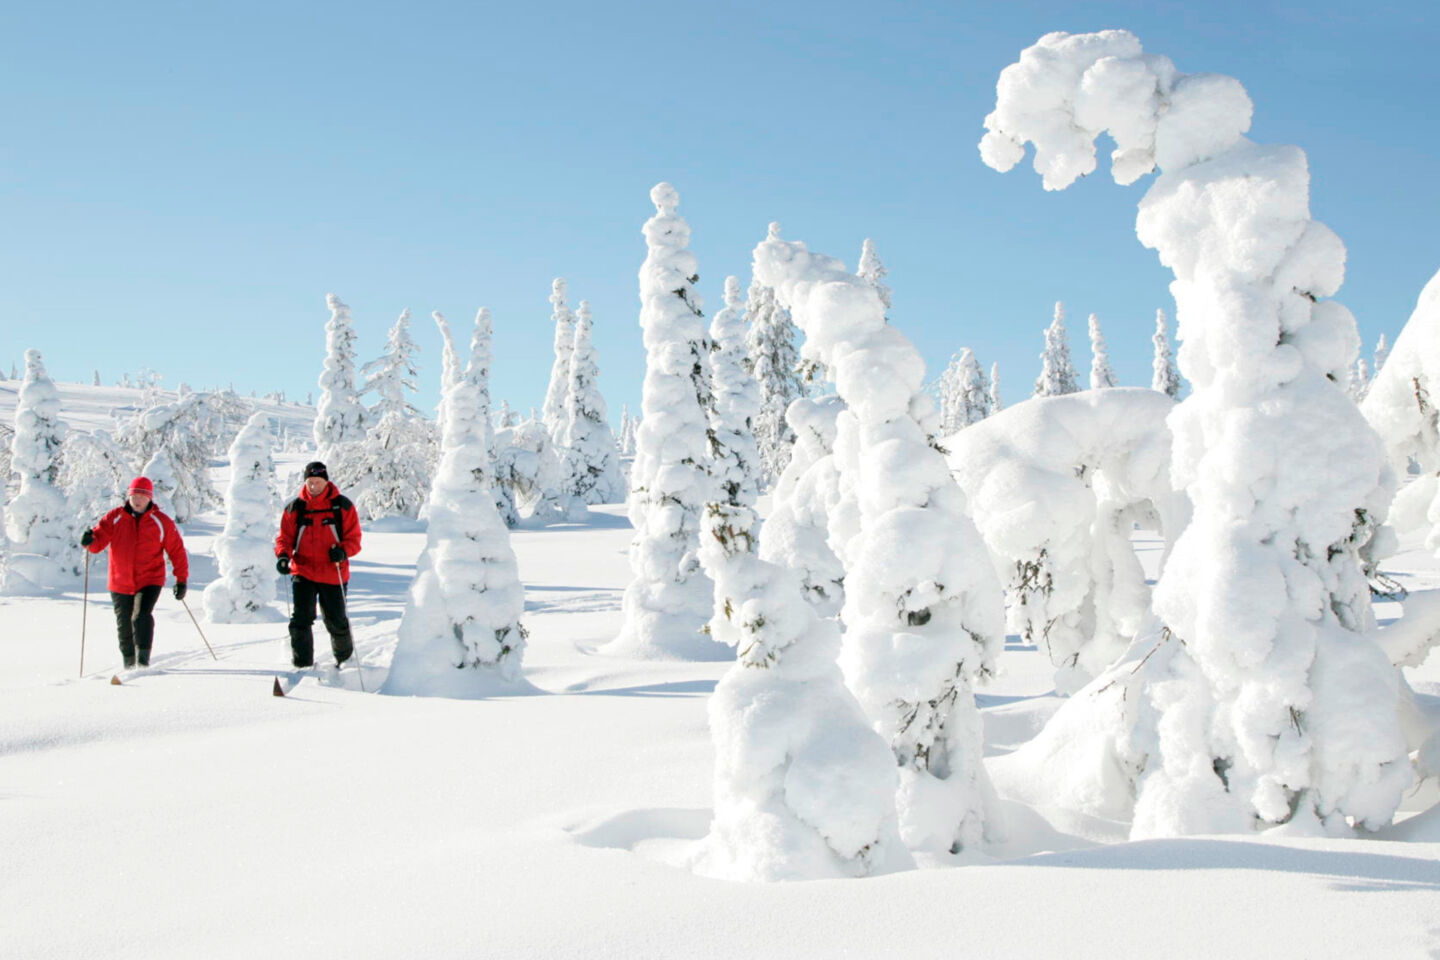 Snow-crowned trees in Posio, a Finnish Lapland filming location